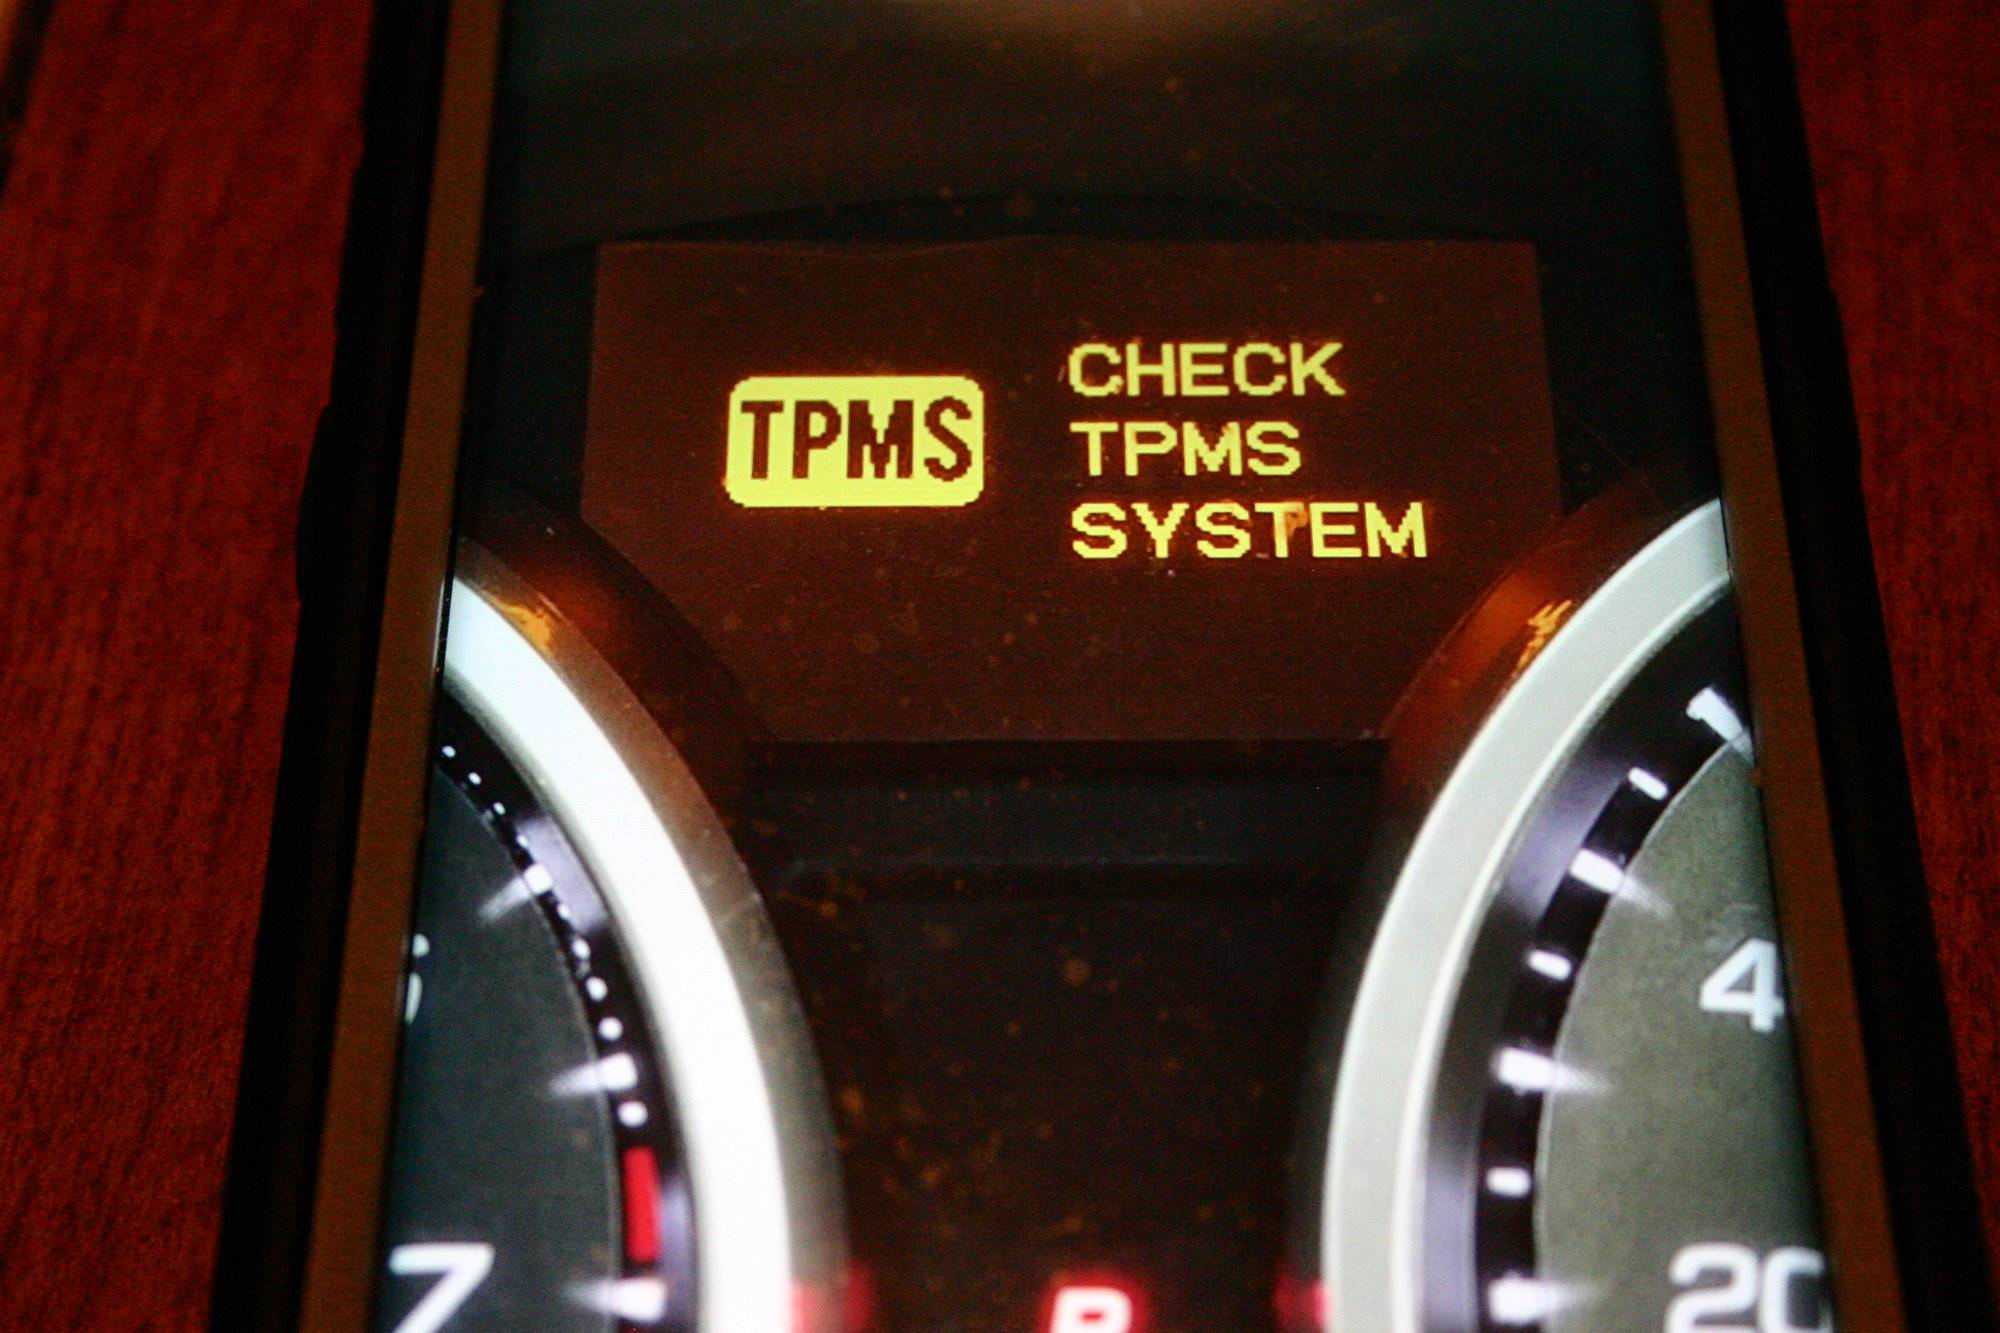 How To Find And Use The TPMS Reset Button